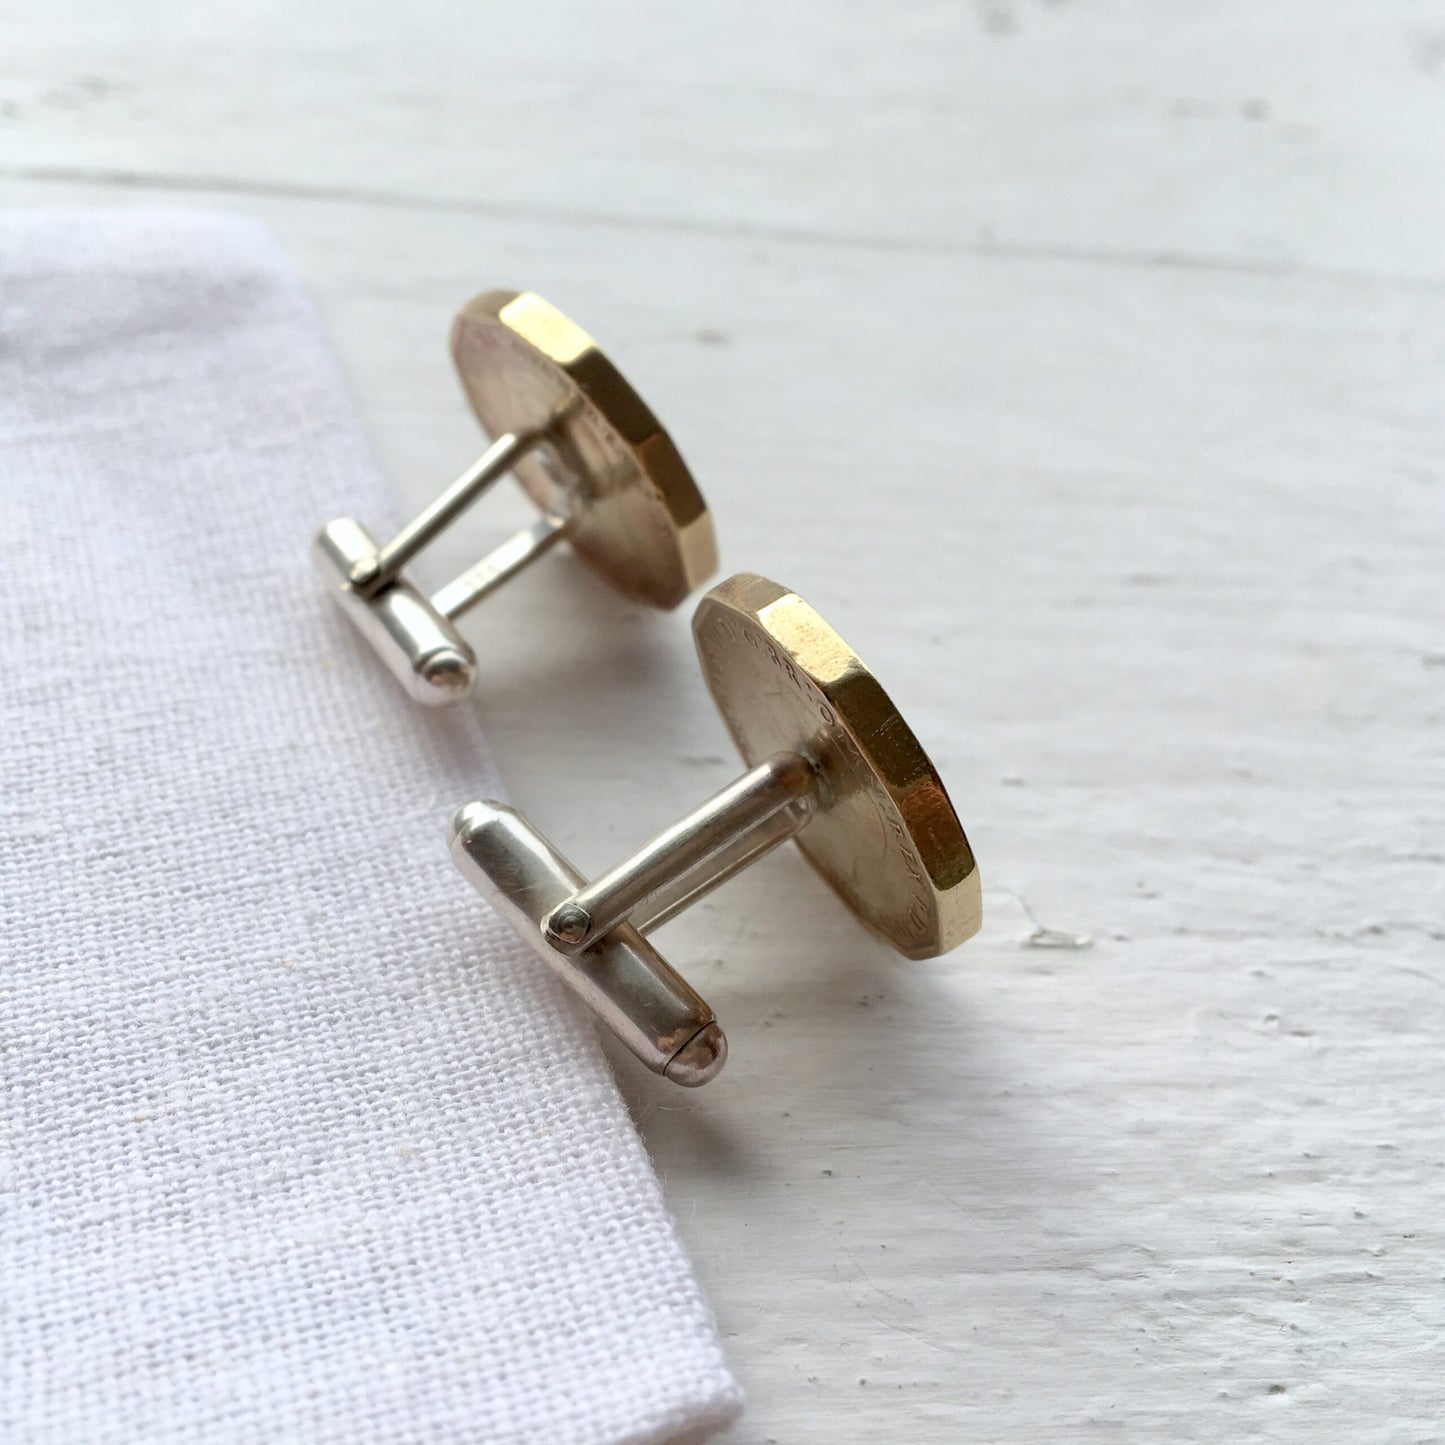 British Threepence- Cufflinks with Sterling Silver